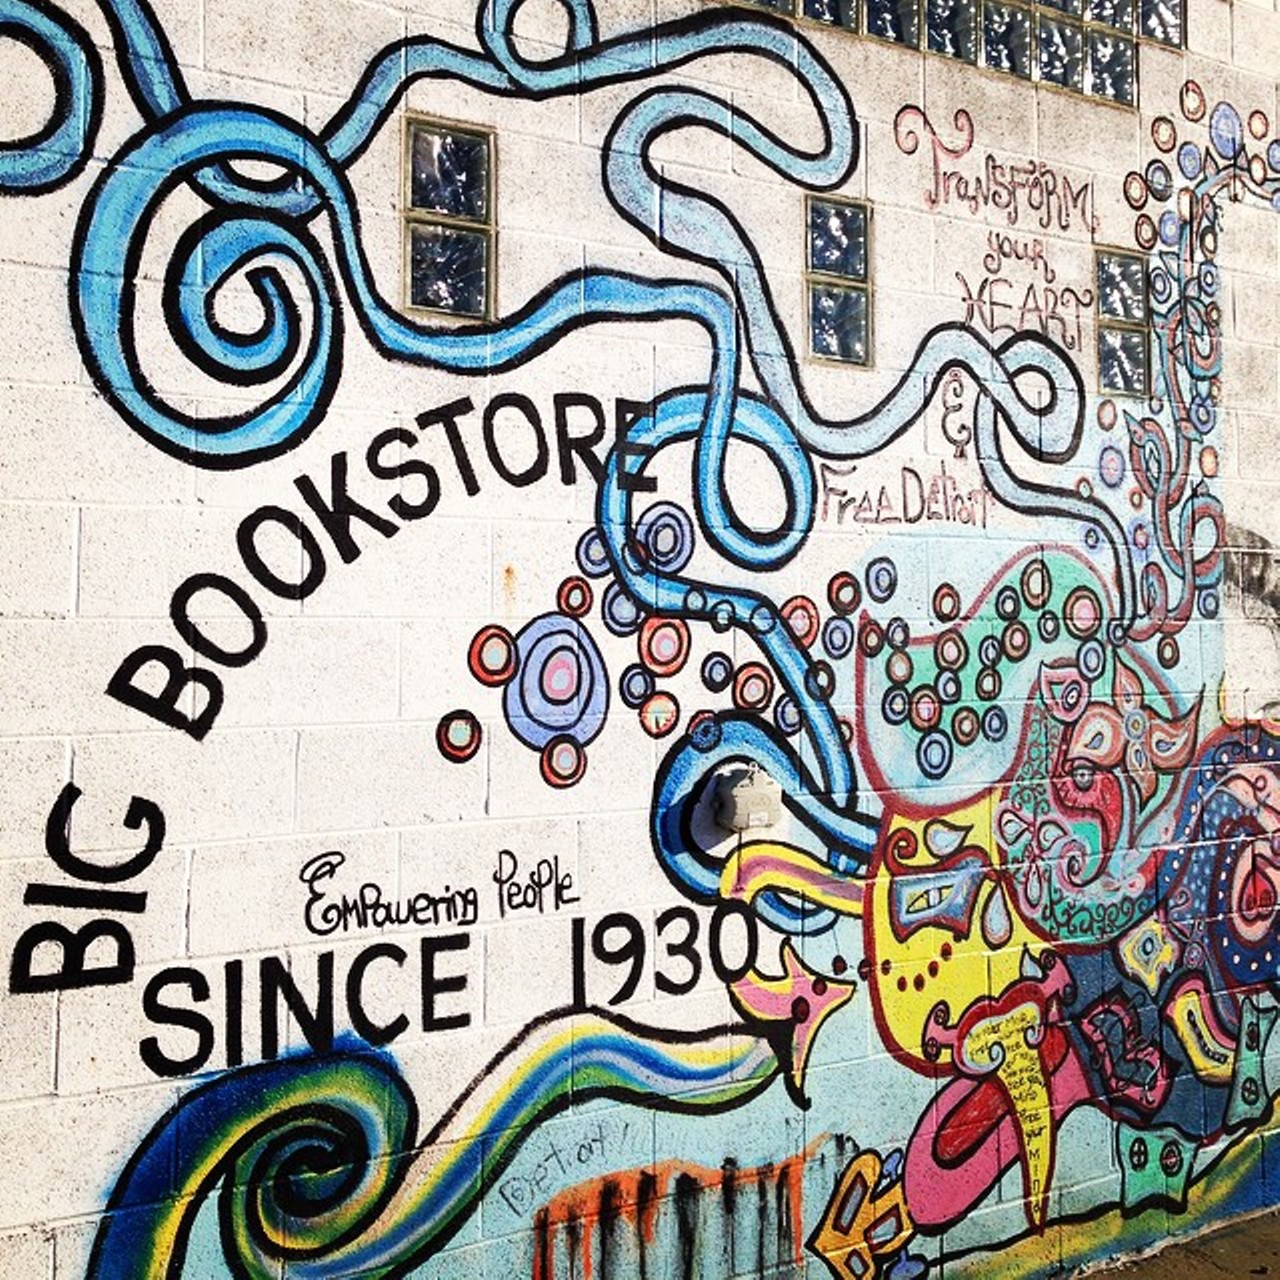 Big Book Store
The oldest continually operating bookstore in Detroit, the Big Book Store earned its name in another era. It changed locations and owners over the years before finding a permanent home in Midtown and becoming the smallest of the three bookstores owned by John King. 5911 Cass, Detroit. (Photo credit: krn_grl on Instagram)